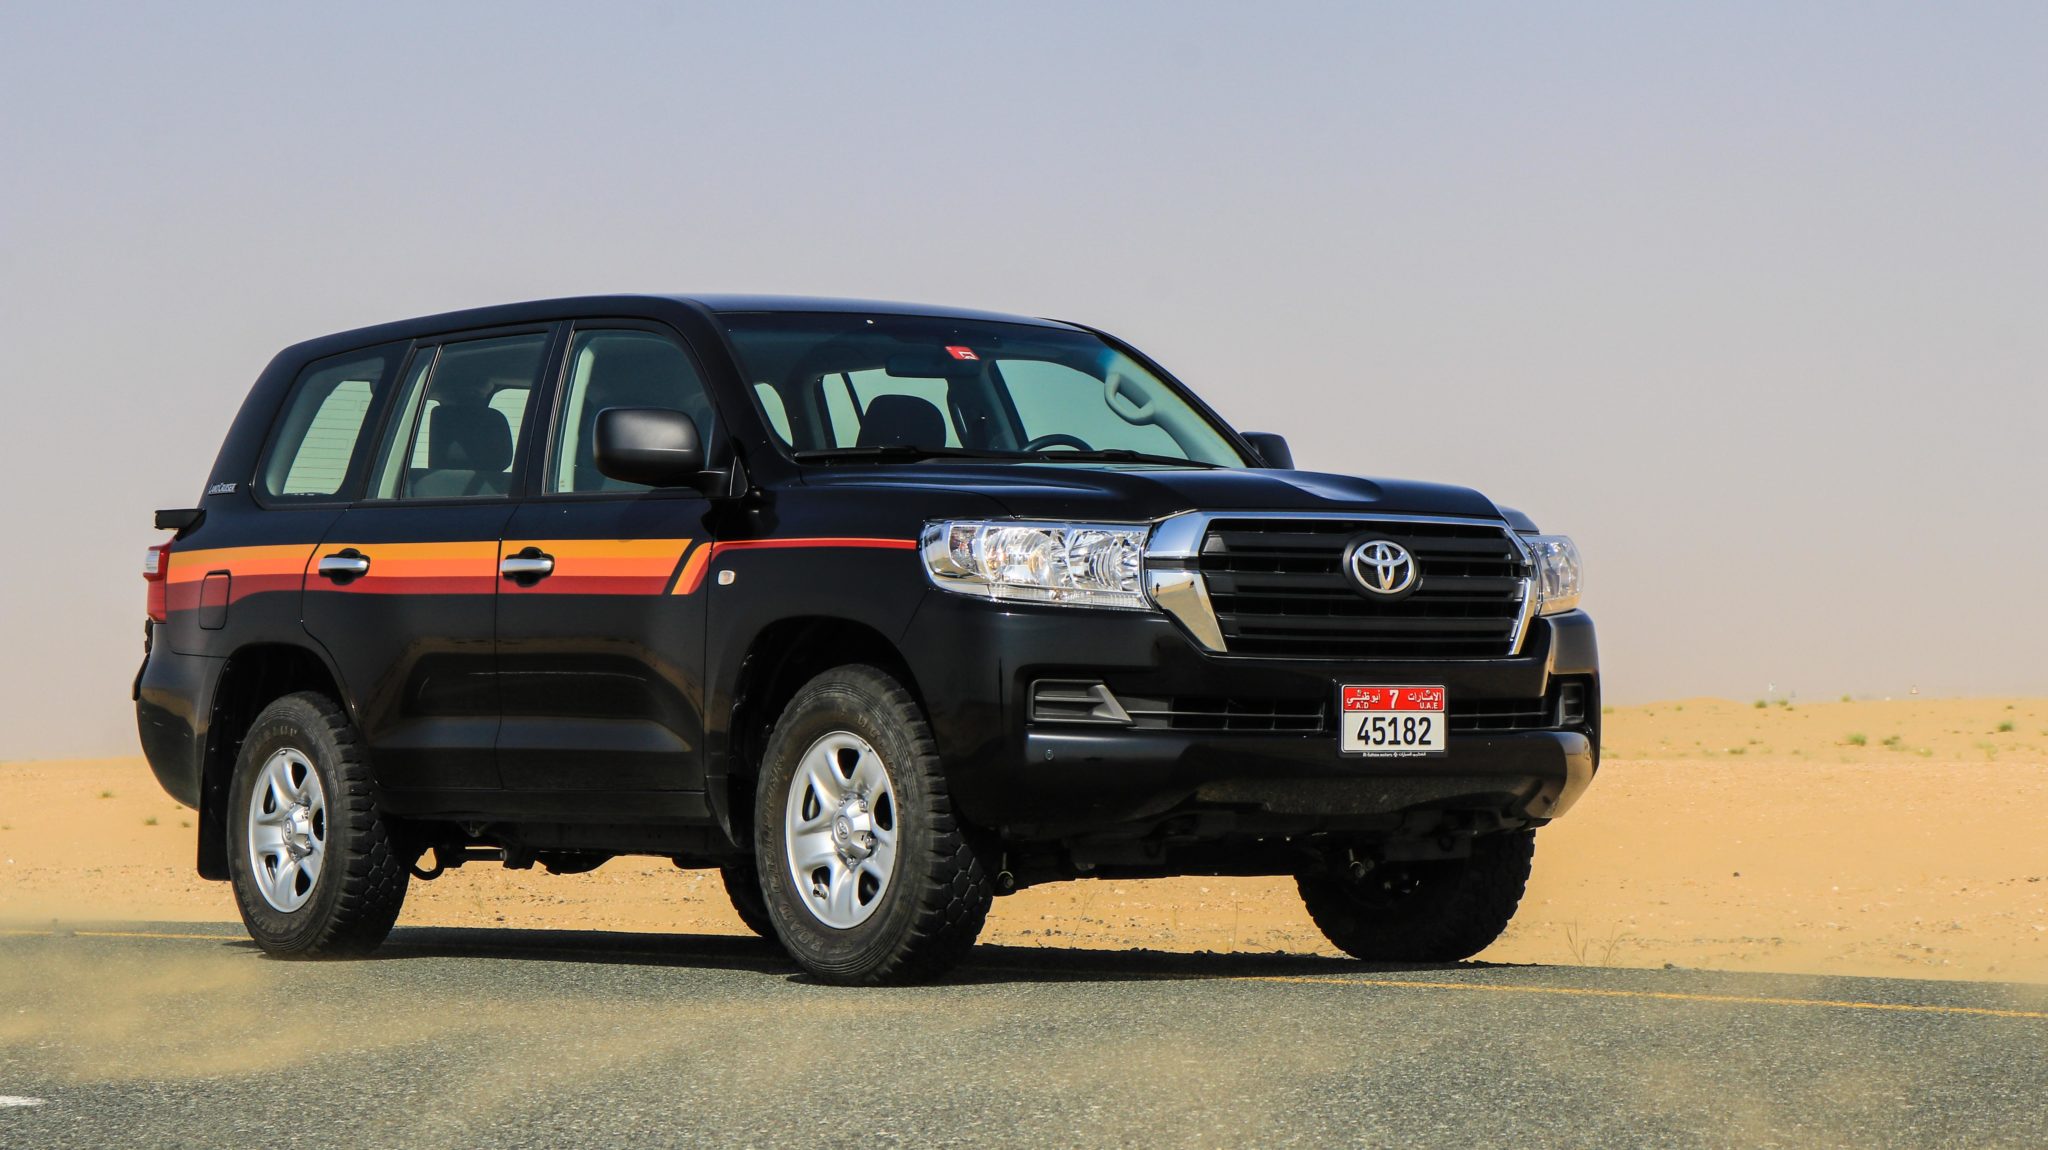 2020 Toyota Land Cruiser Heritage Edition A Throwback To A Simpler